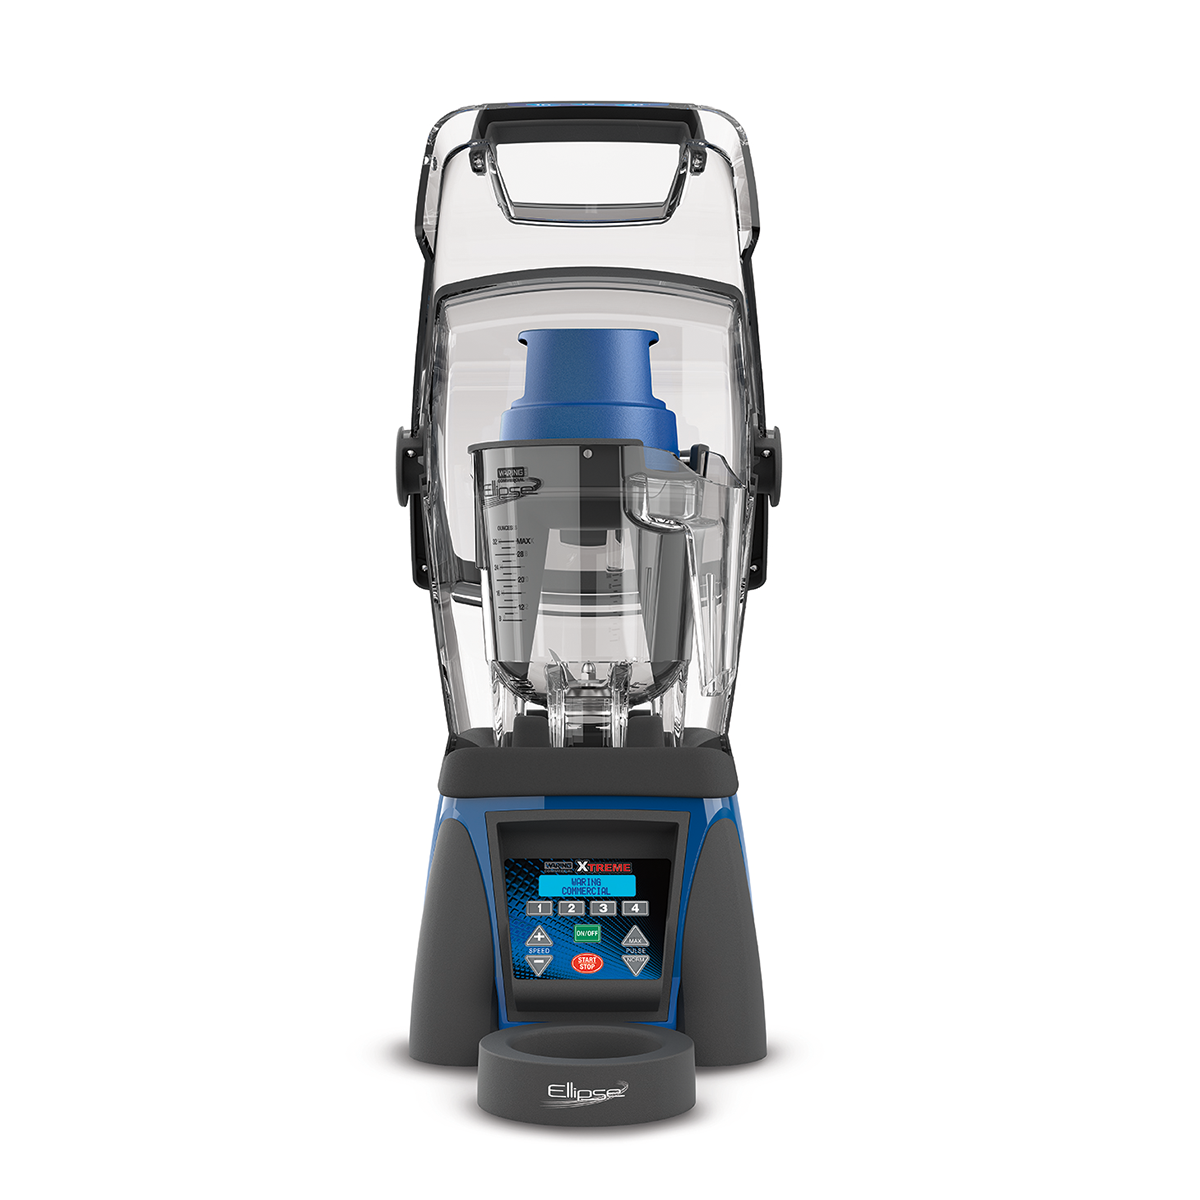 Waring MXE2000 3.5 HP Ellipse Blender w/ LCD Display, Programmable, 32 oz. Copolyester Container & Sound Enclosure